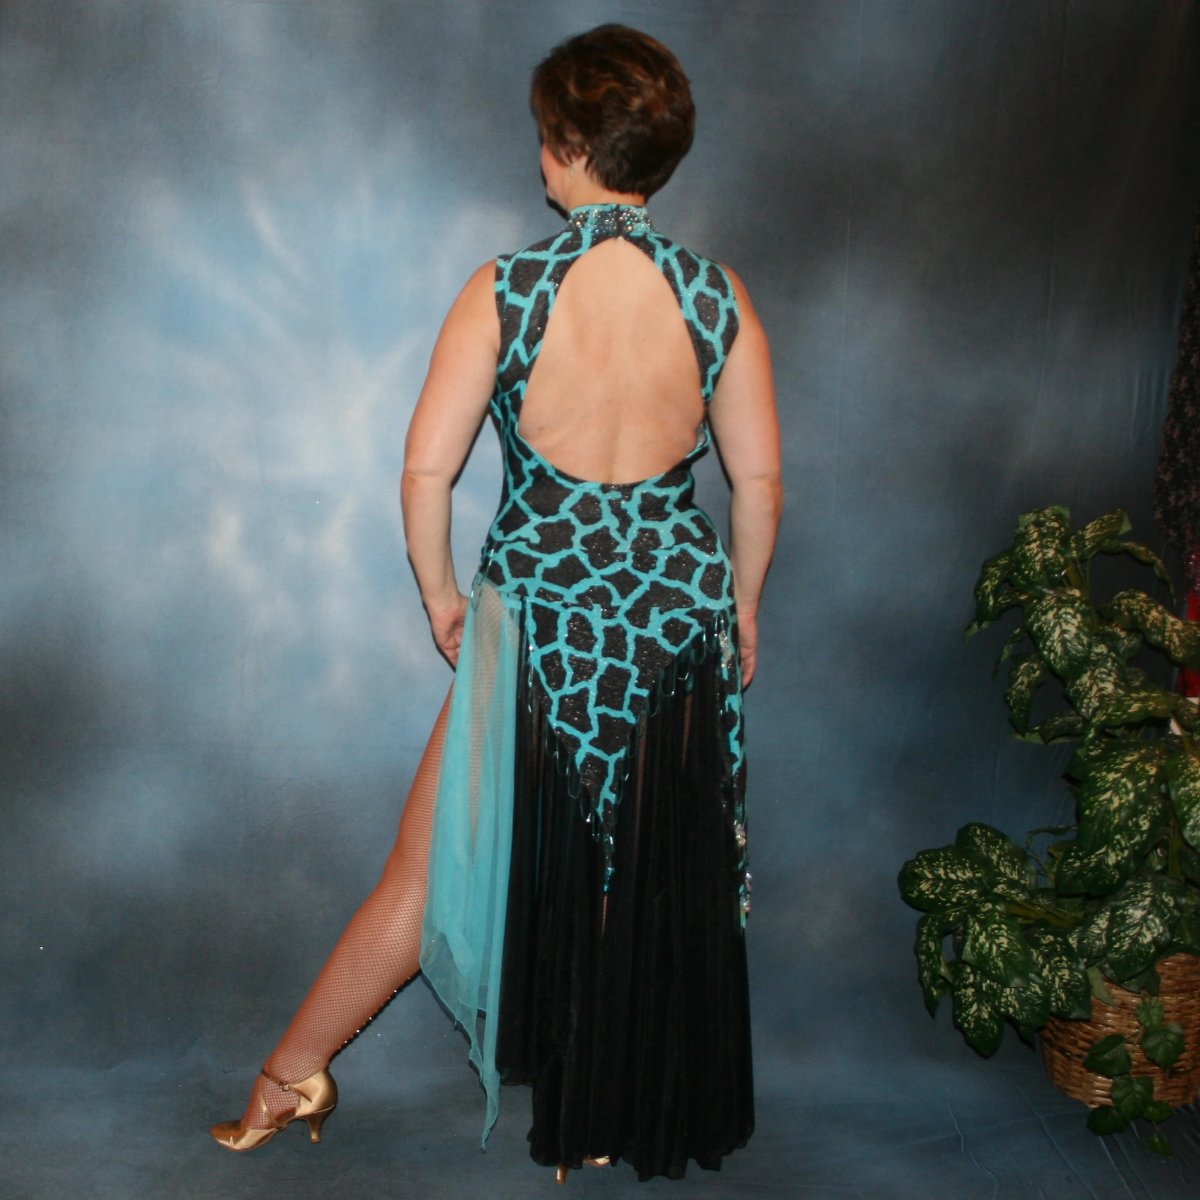 back view of Black & turquoise tango dress created in an animal print glitter stretch fabric with black chiffon tricot panels embellished with light turquoise Swarovski rhinestones at high neck & bugle bead hand beading is fabulous for tangos, rumbas or boleros, with interesting panel skirting, low keyhole back and lots of hand beading throughout the skirt panels.